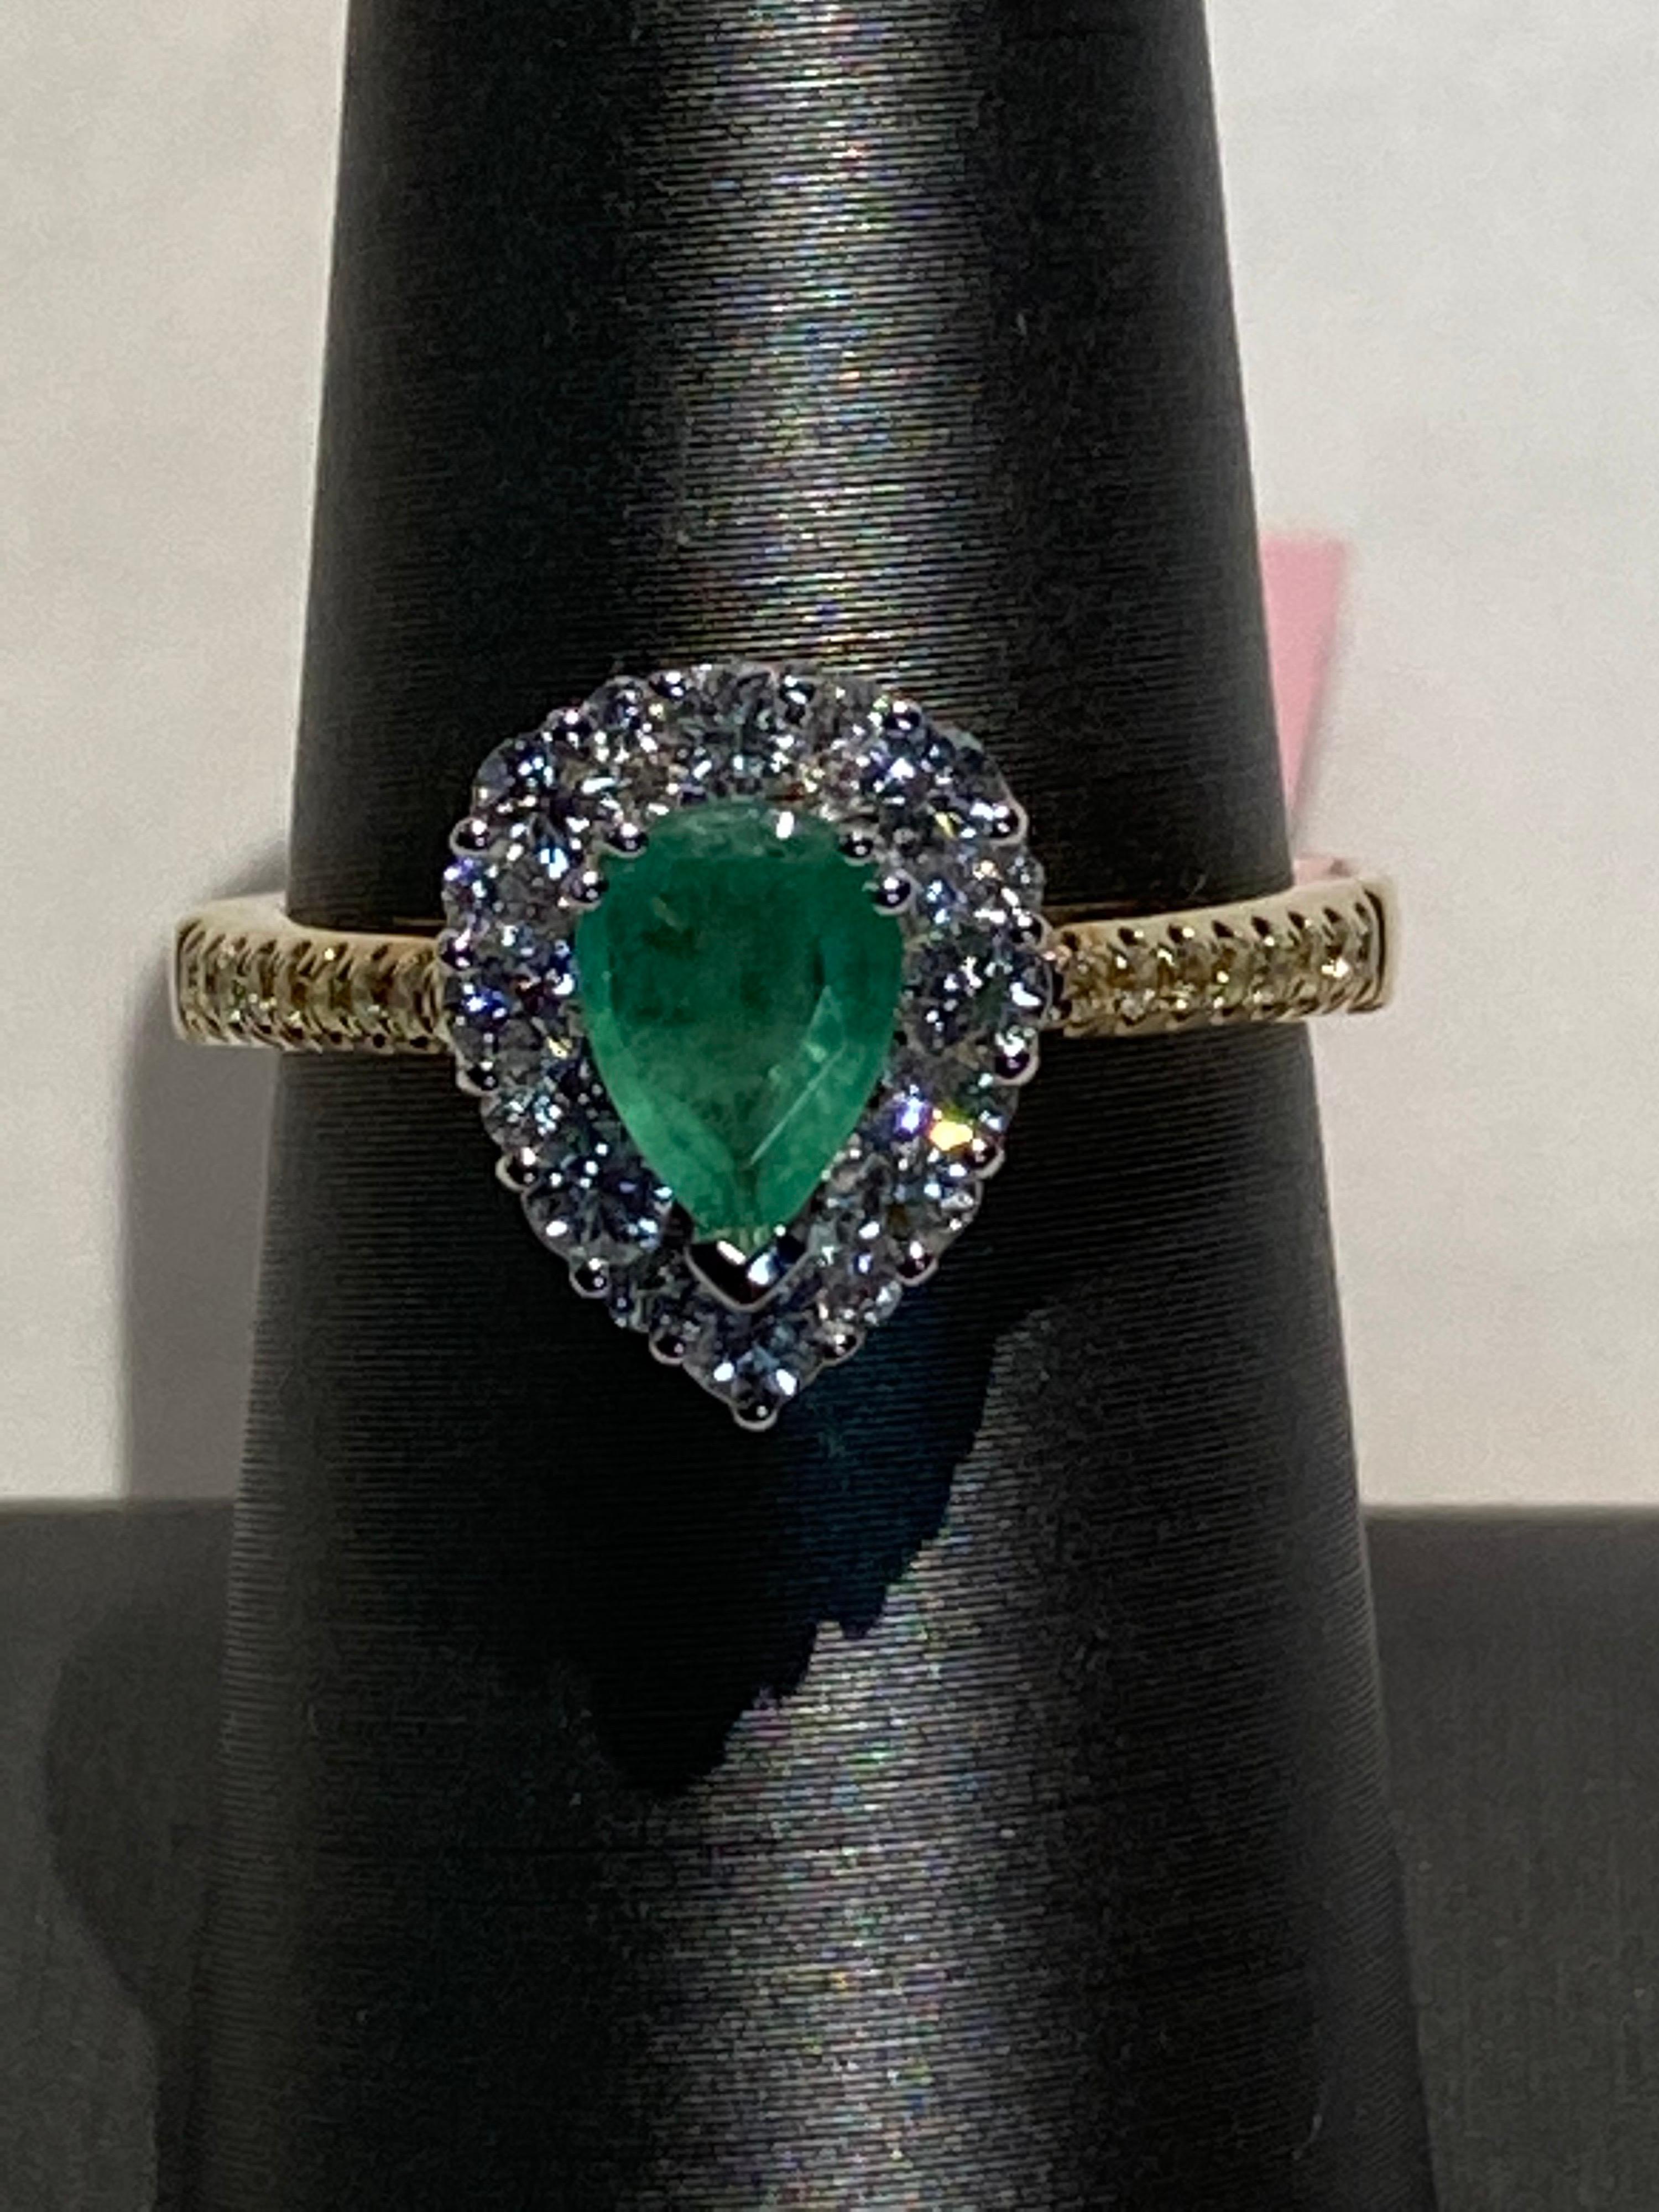 This Pear shaped emerald has a diamond halo set in white gold with a yellow gold band of yellow diamond. Classic style which never goes out of style. 
Emerald: 0.65ct
Yellow Diamond: 0.05ct
White Diamond: 0.45ct
Two Tone Gold: 14K
Size: 7